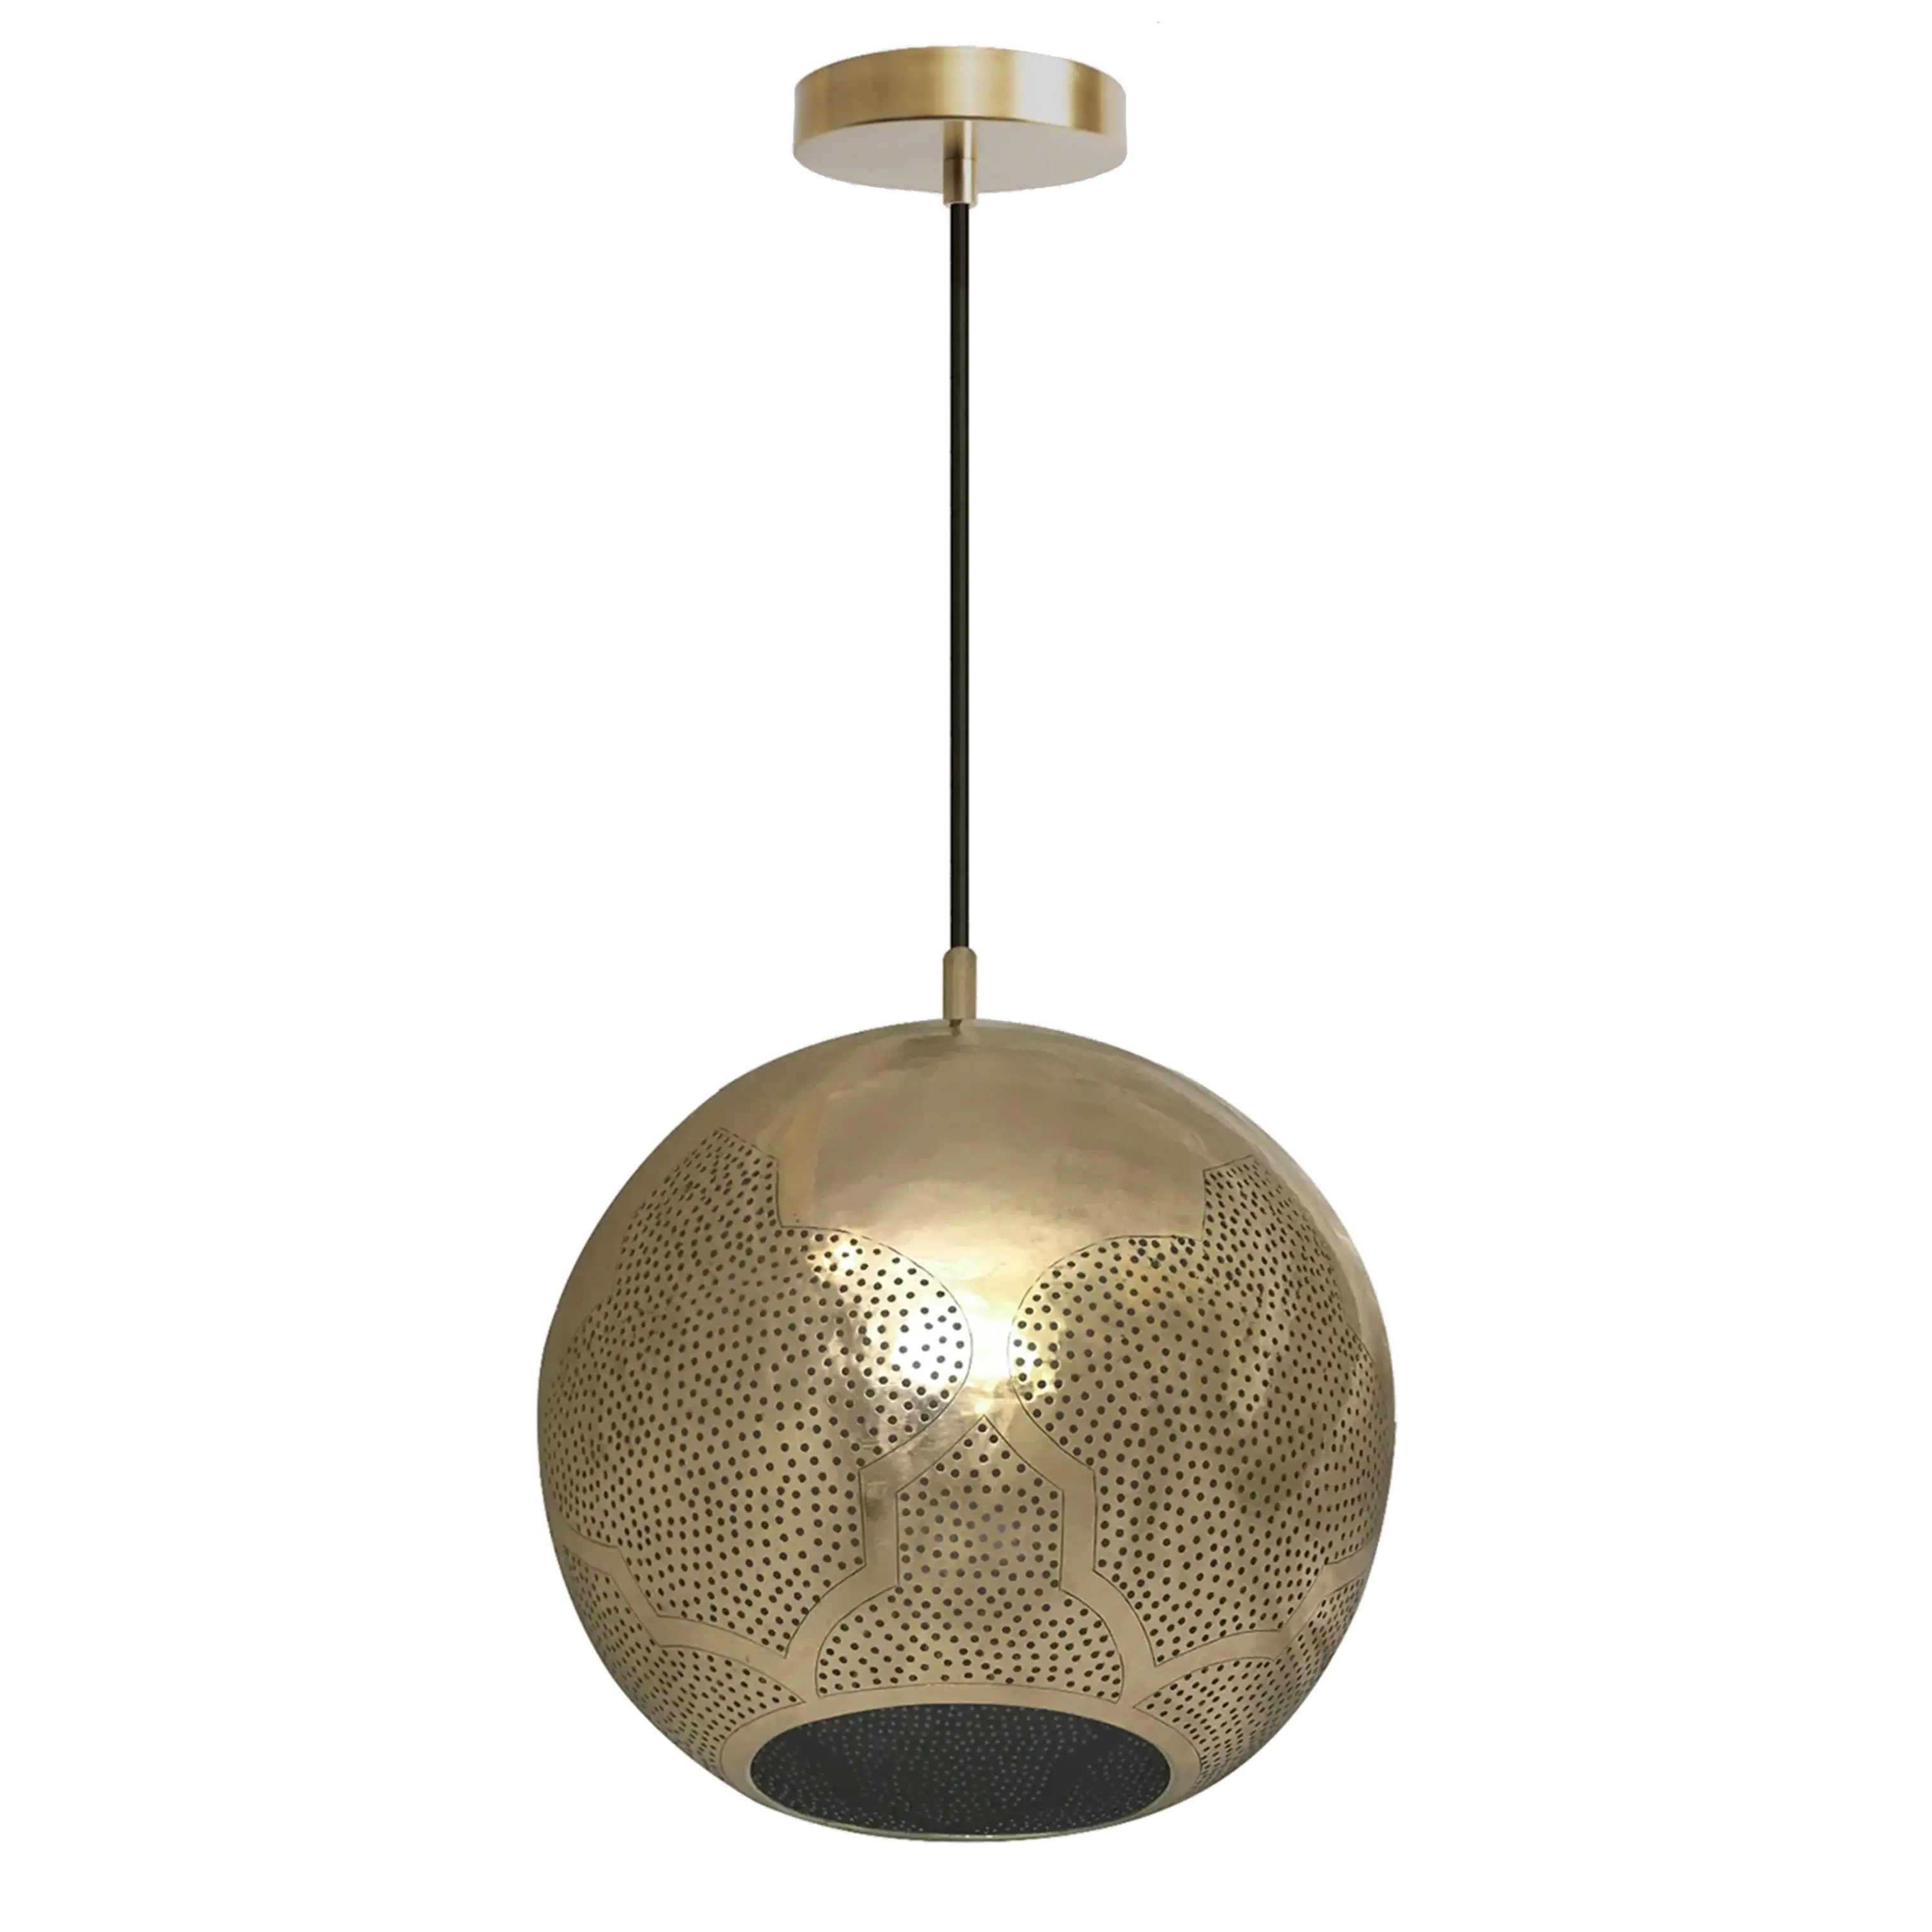 Dounia home Pendant light in  polished brass made of Metal, Model: Najma reversed